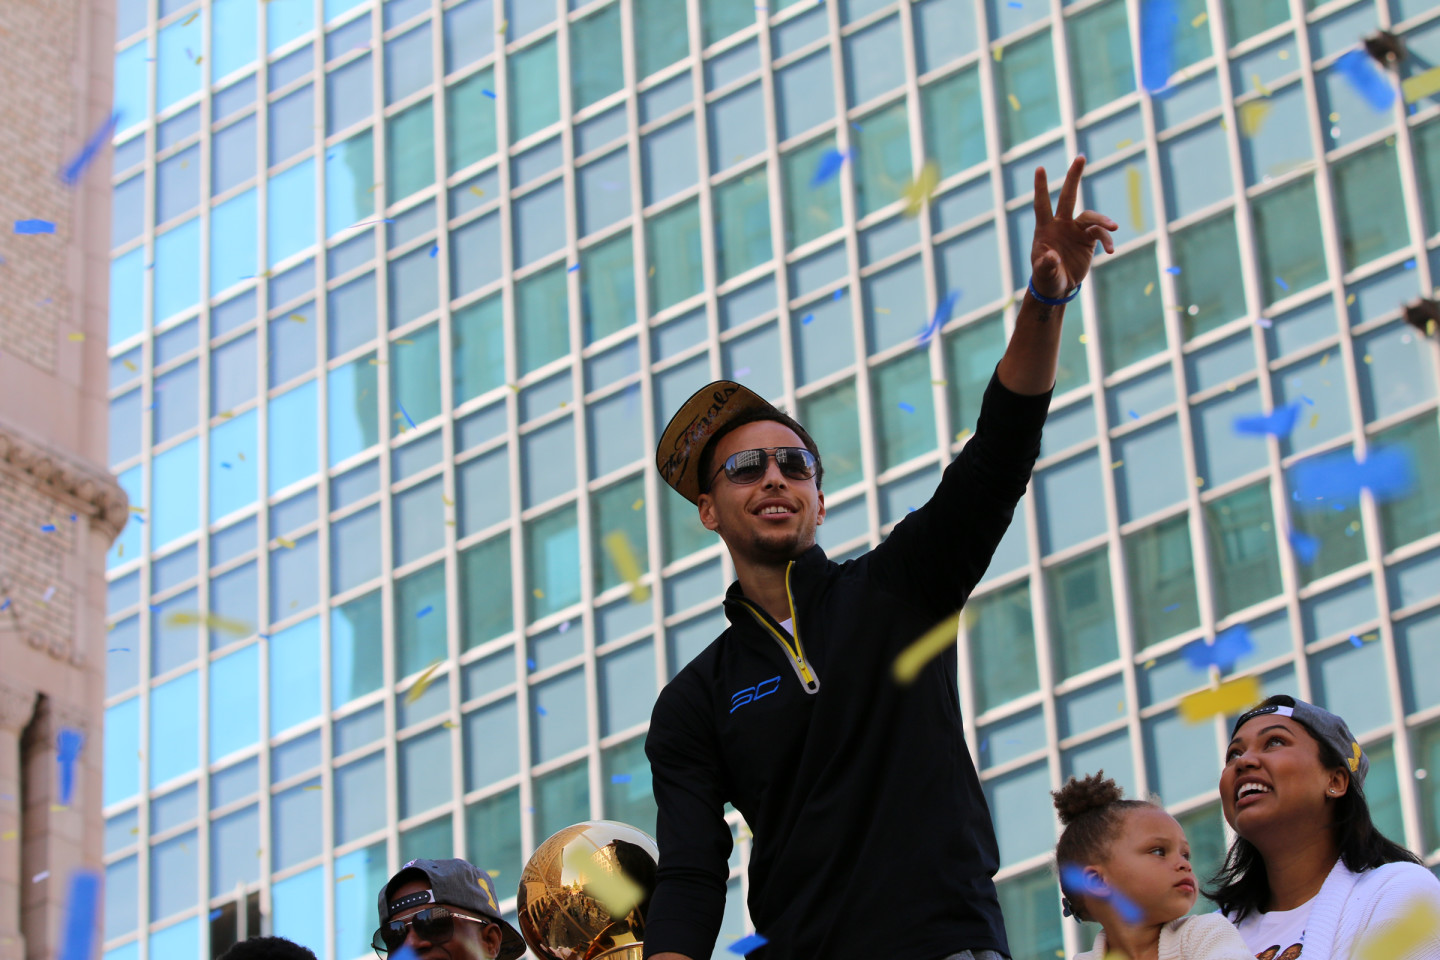 Stephen Curry celebrates during the Warriors championship parade Friday. (Adam Grossberg/KQED)